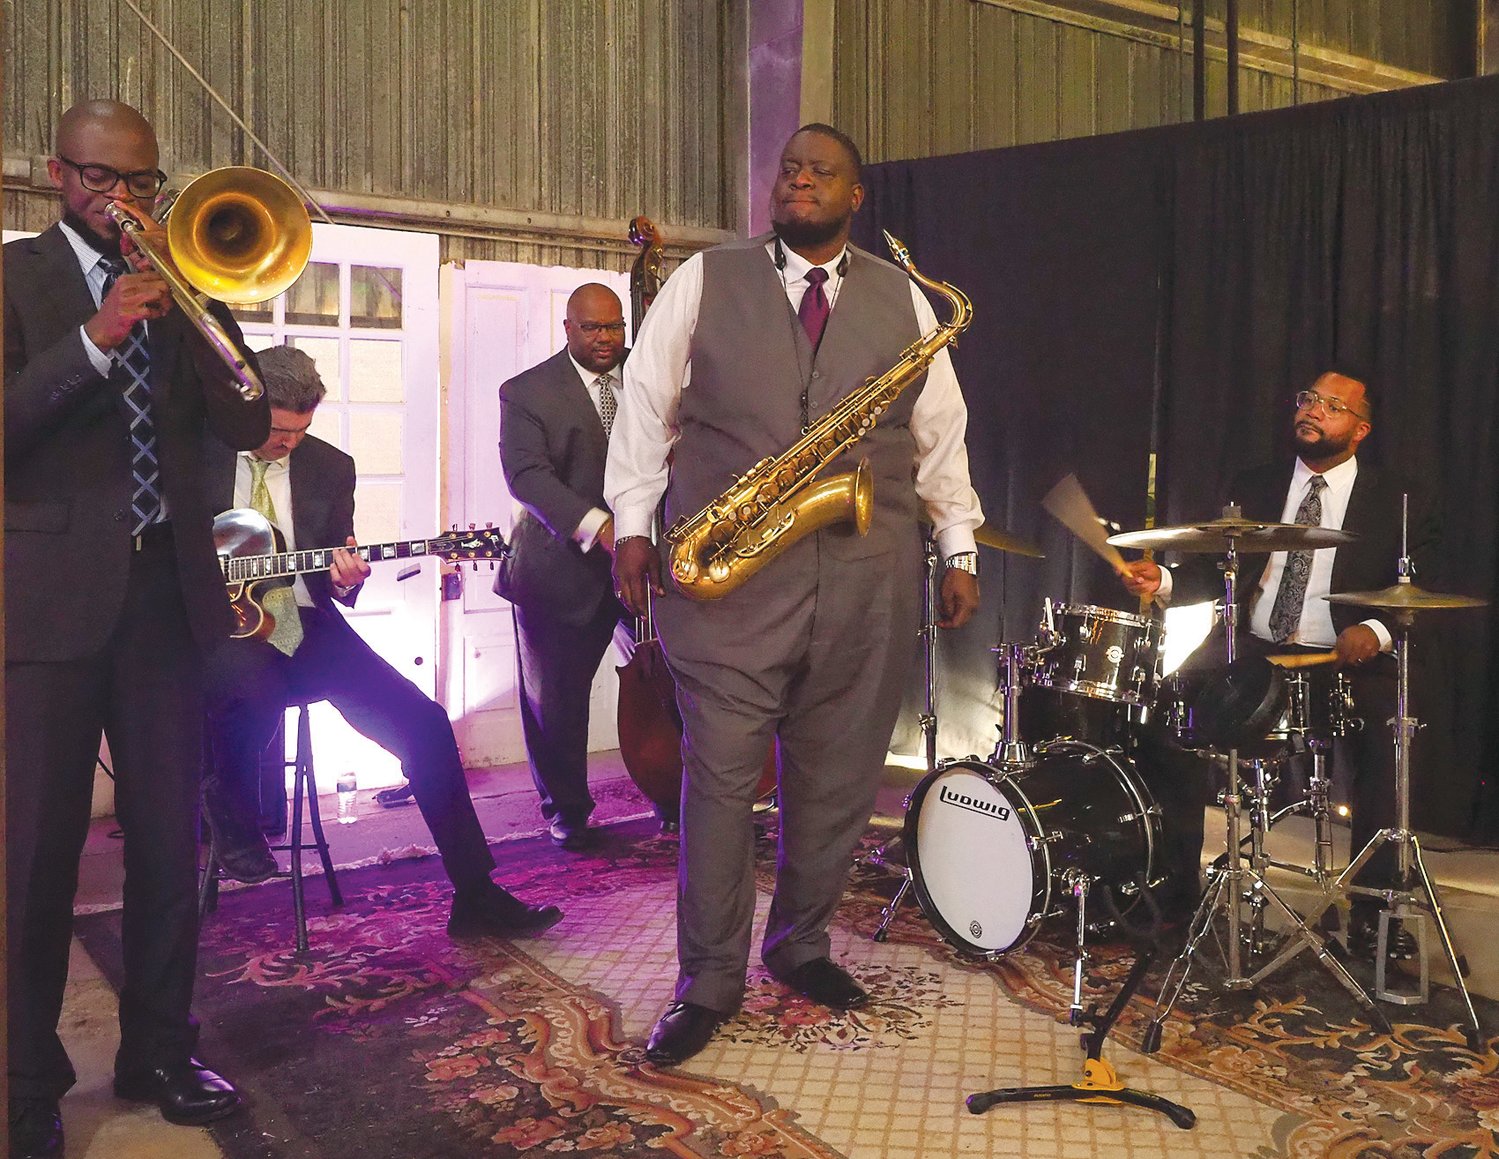 The Grammy-nominated John Brown Quintet performs at the WEBB Squared launch party Saturday at The Plant in Pittsboro.